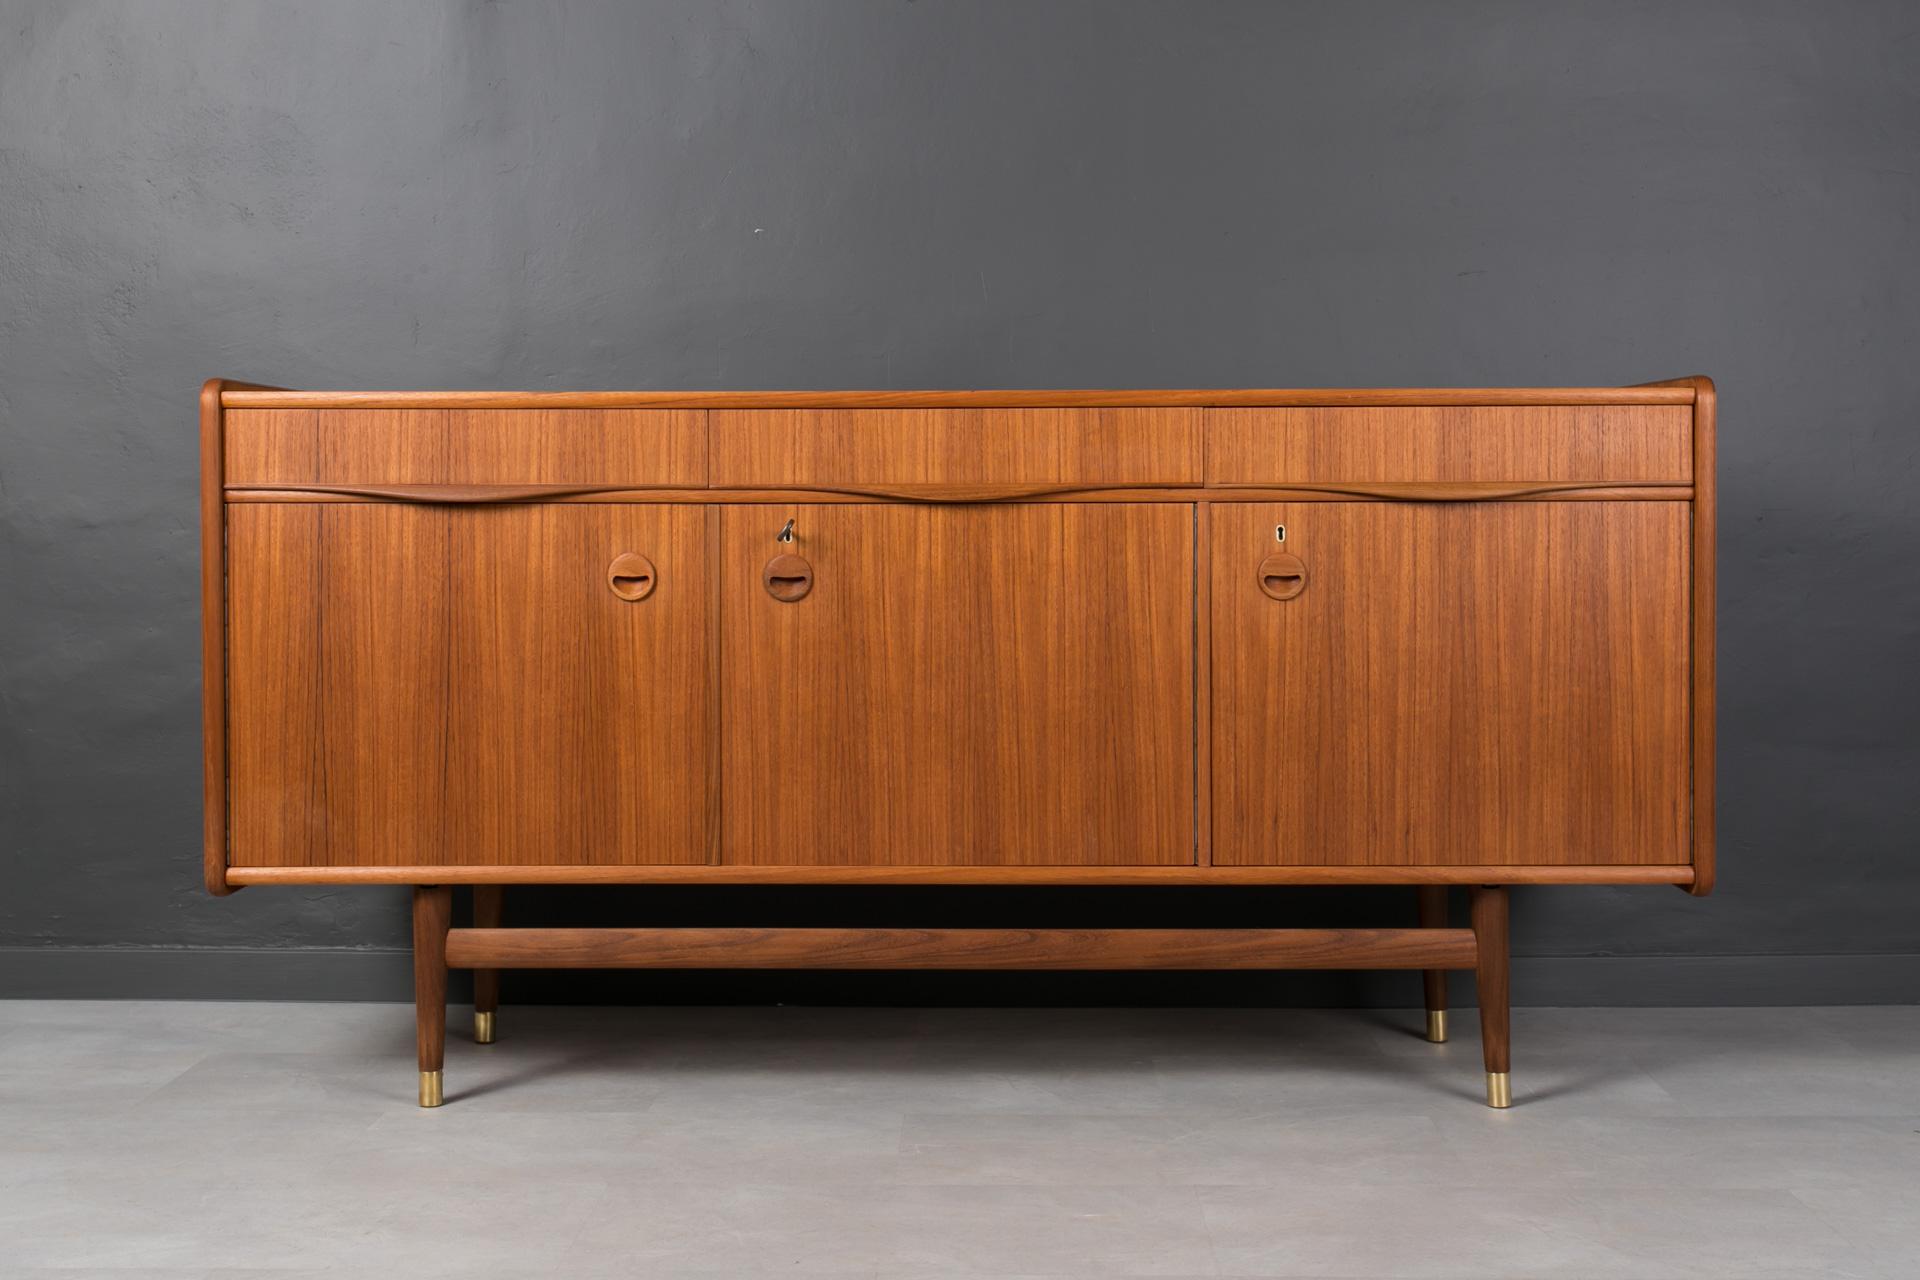 This teak sideboard comes from Norway and was made around 1960s. It is most probably one of Sven Andersen designs. It features two storage sections, each one with a shelf. Both sections are lockable with a key. Three practical drawers reside above